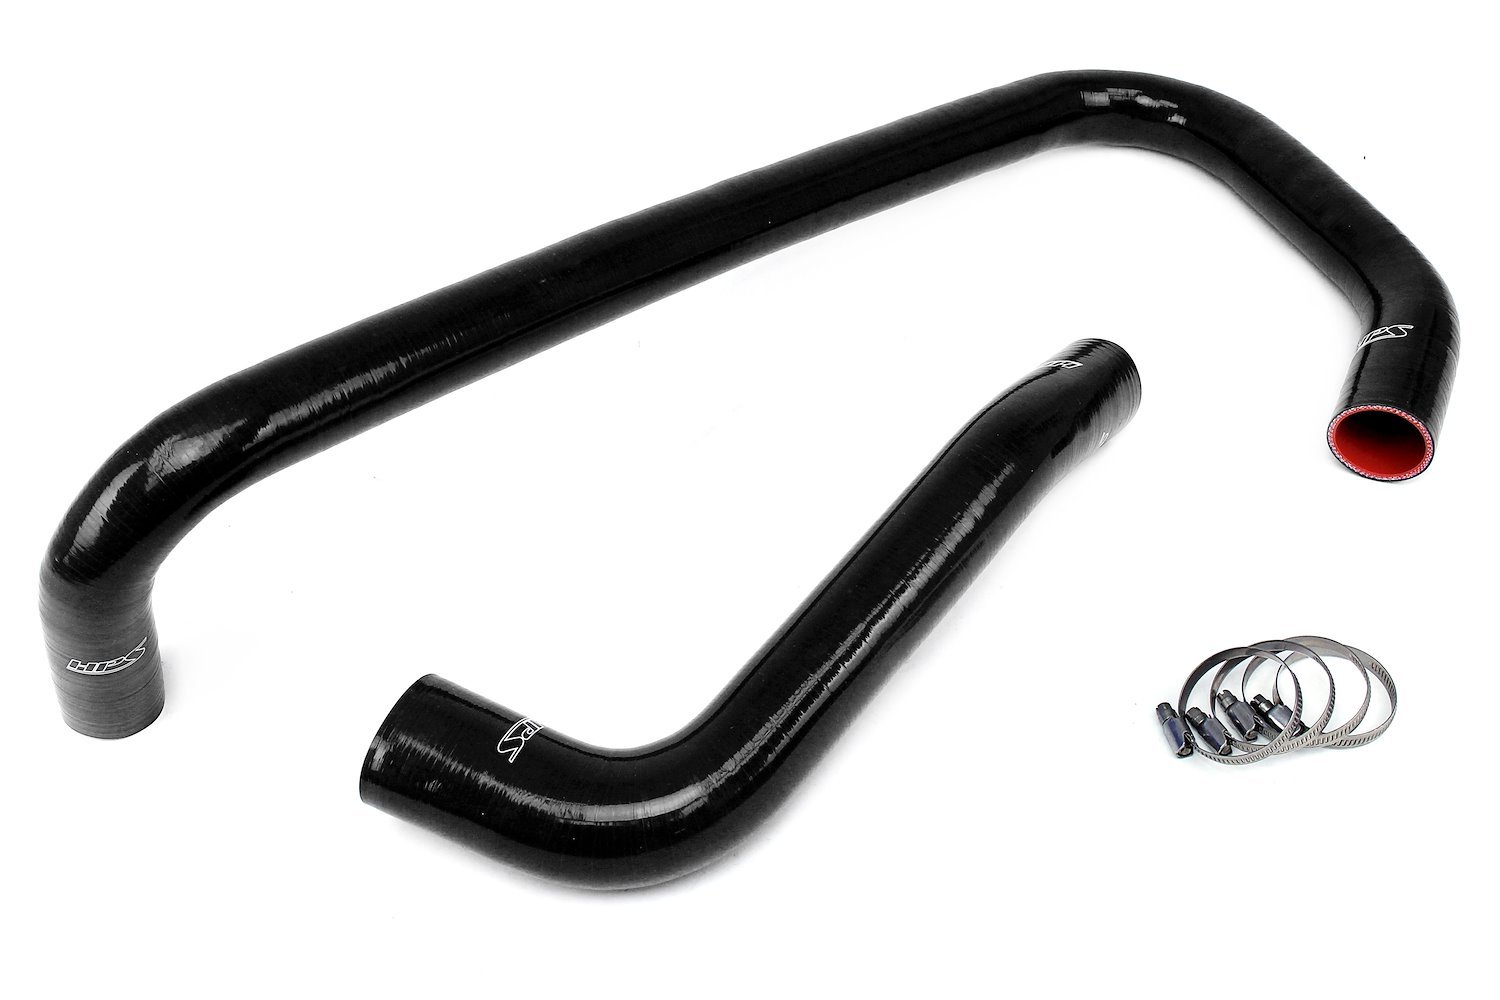 57-1818-BLK Radiator Hose Kit, 3-Ply Reinforced Silicone, Replaces Rubber Radiator Coolant Hoses